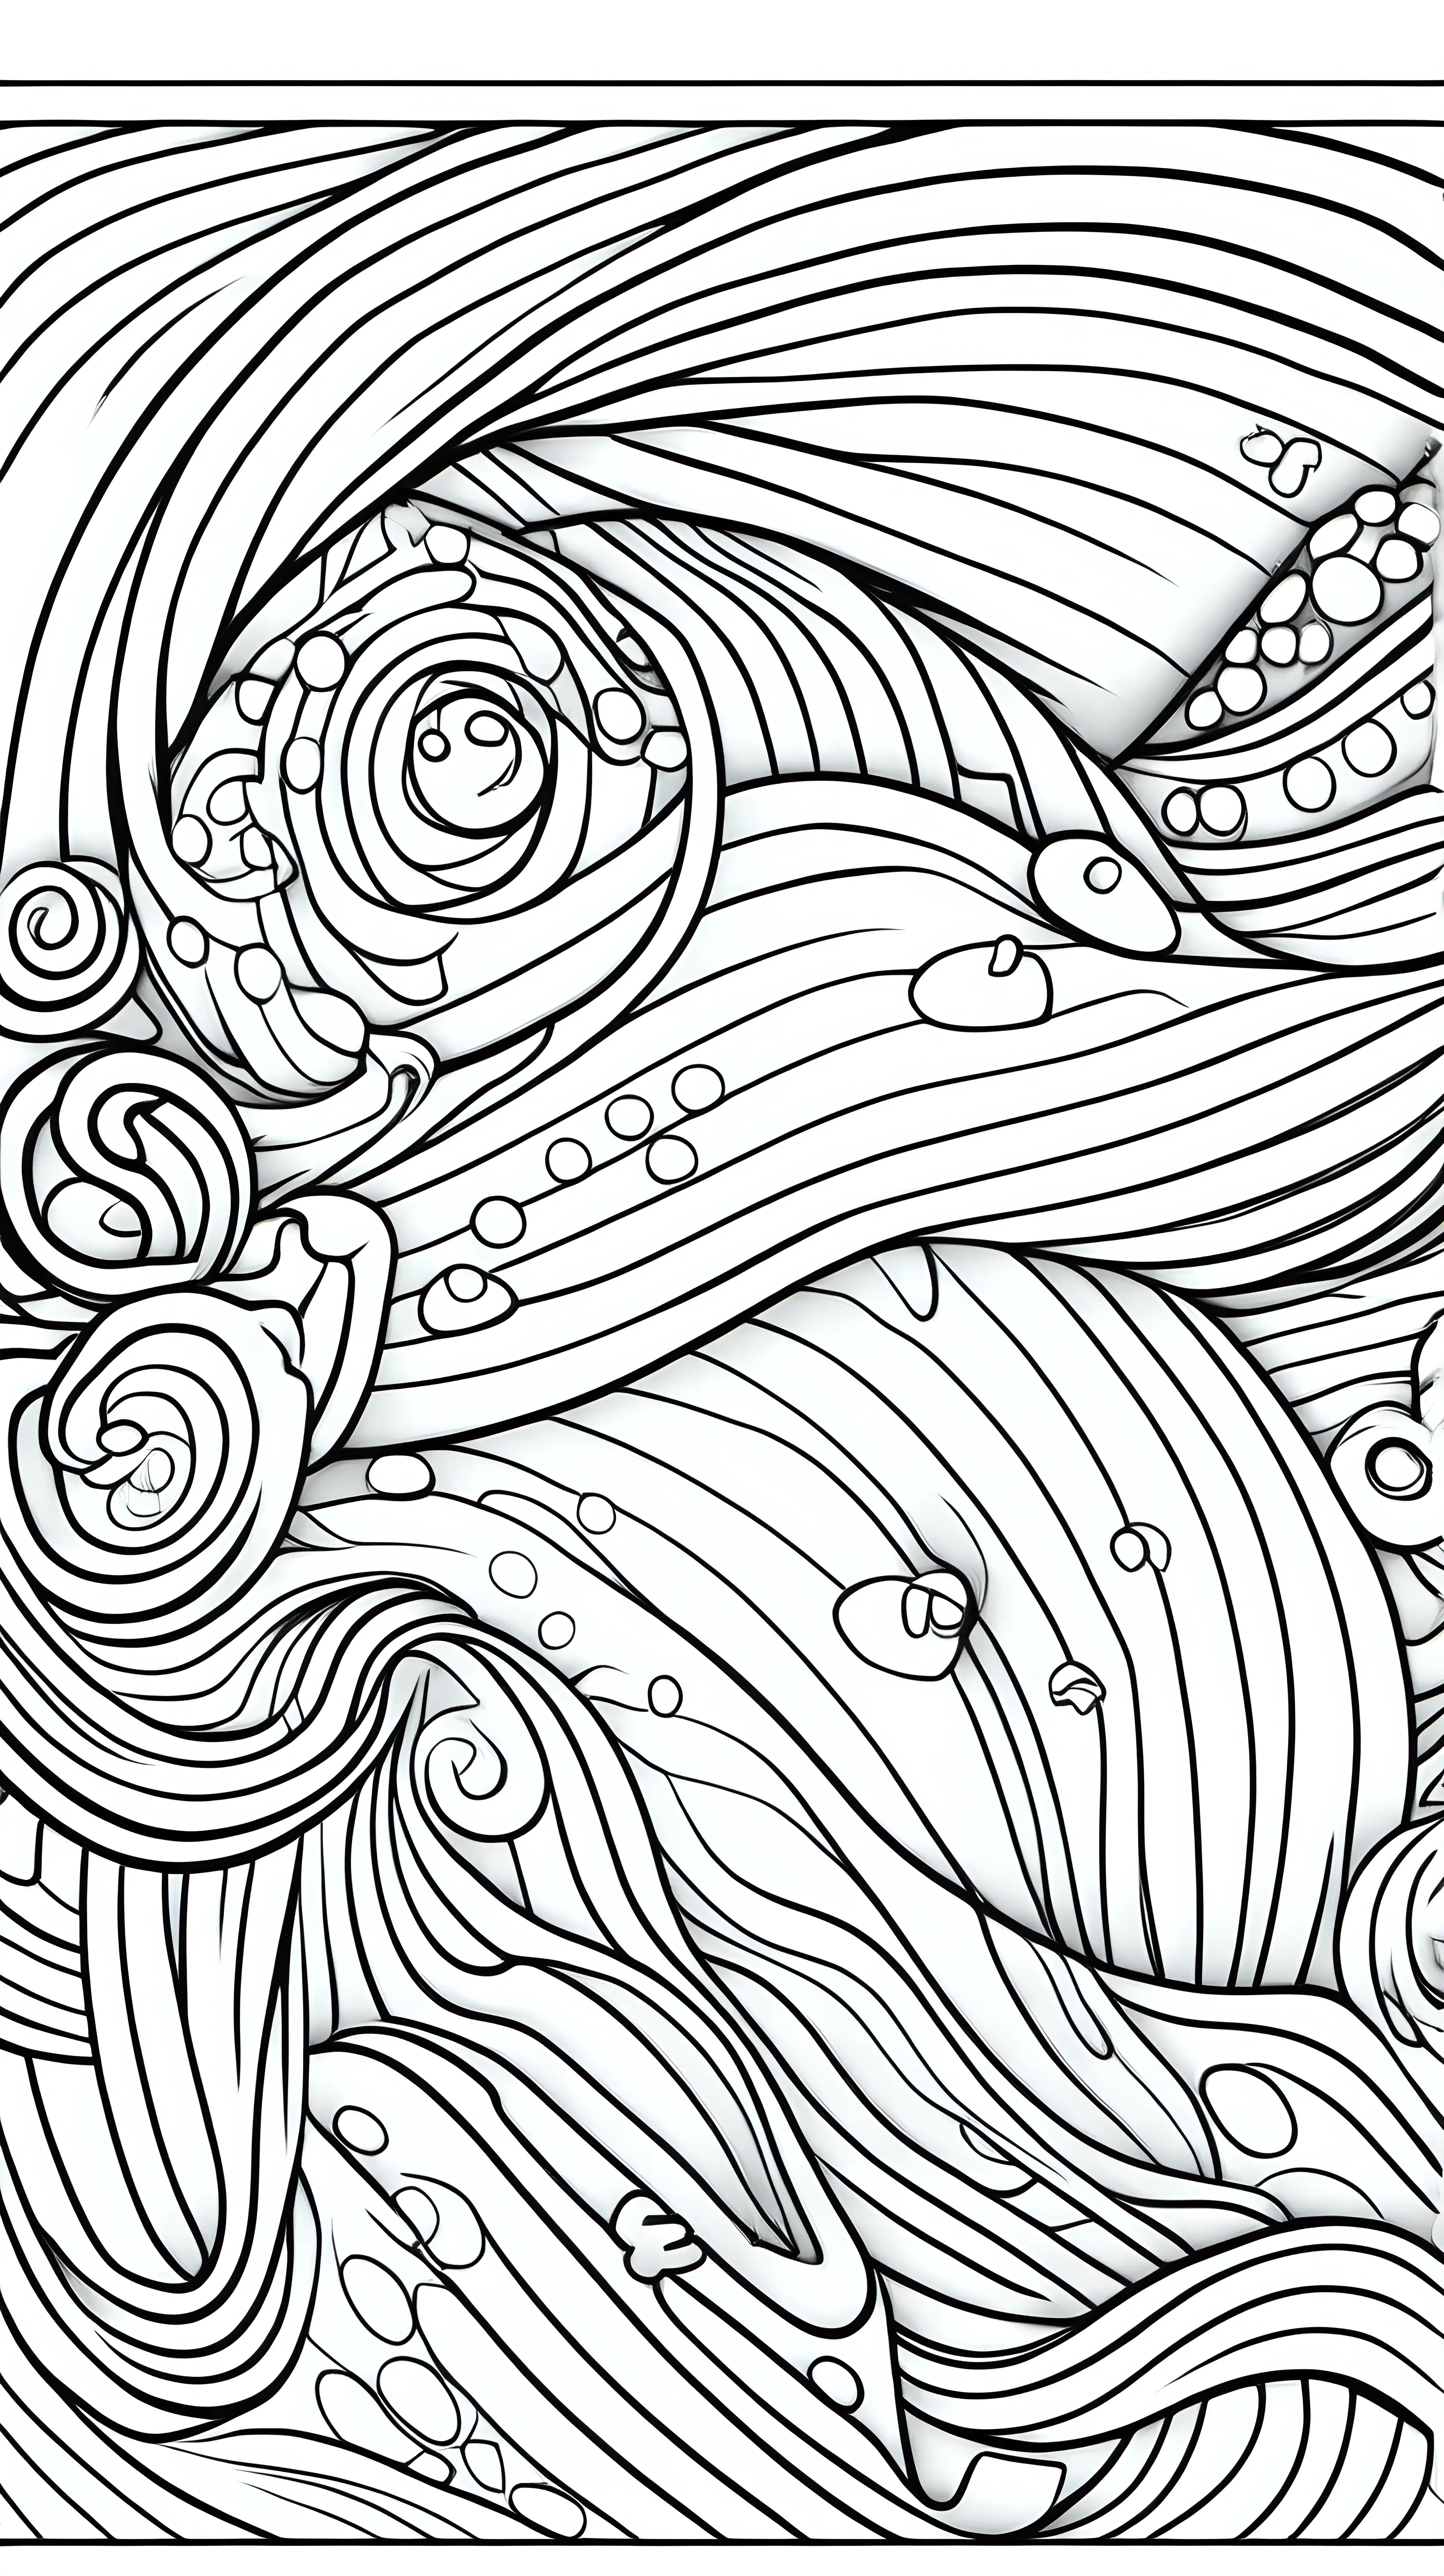 Draw 2 – Patterns, Shapes & Pictures